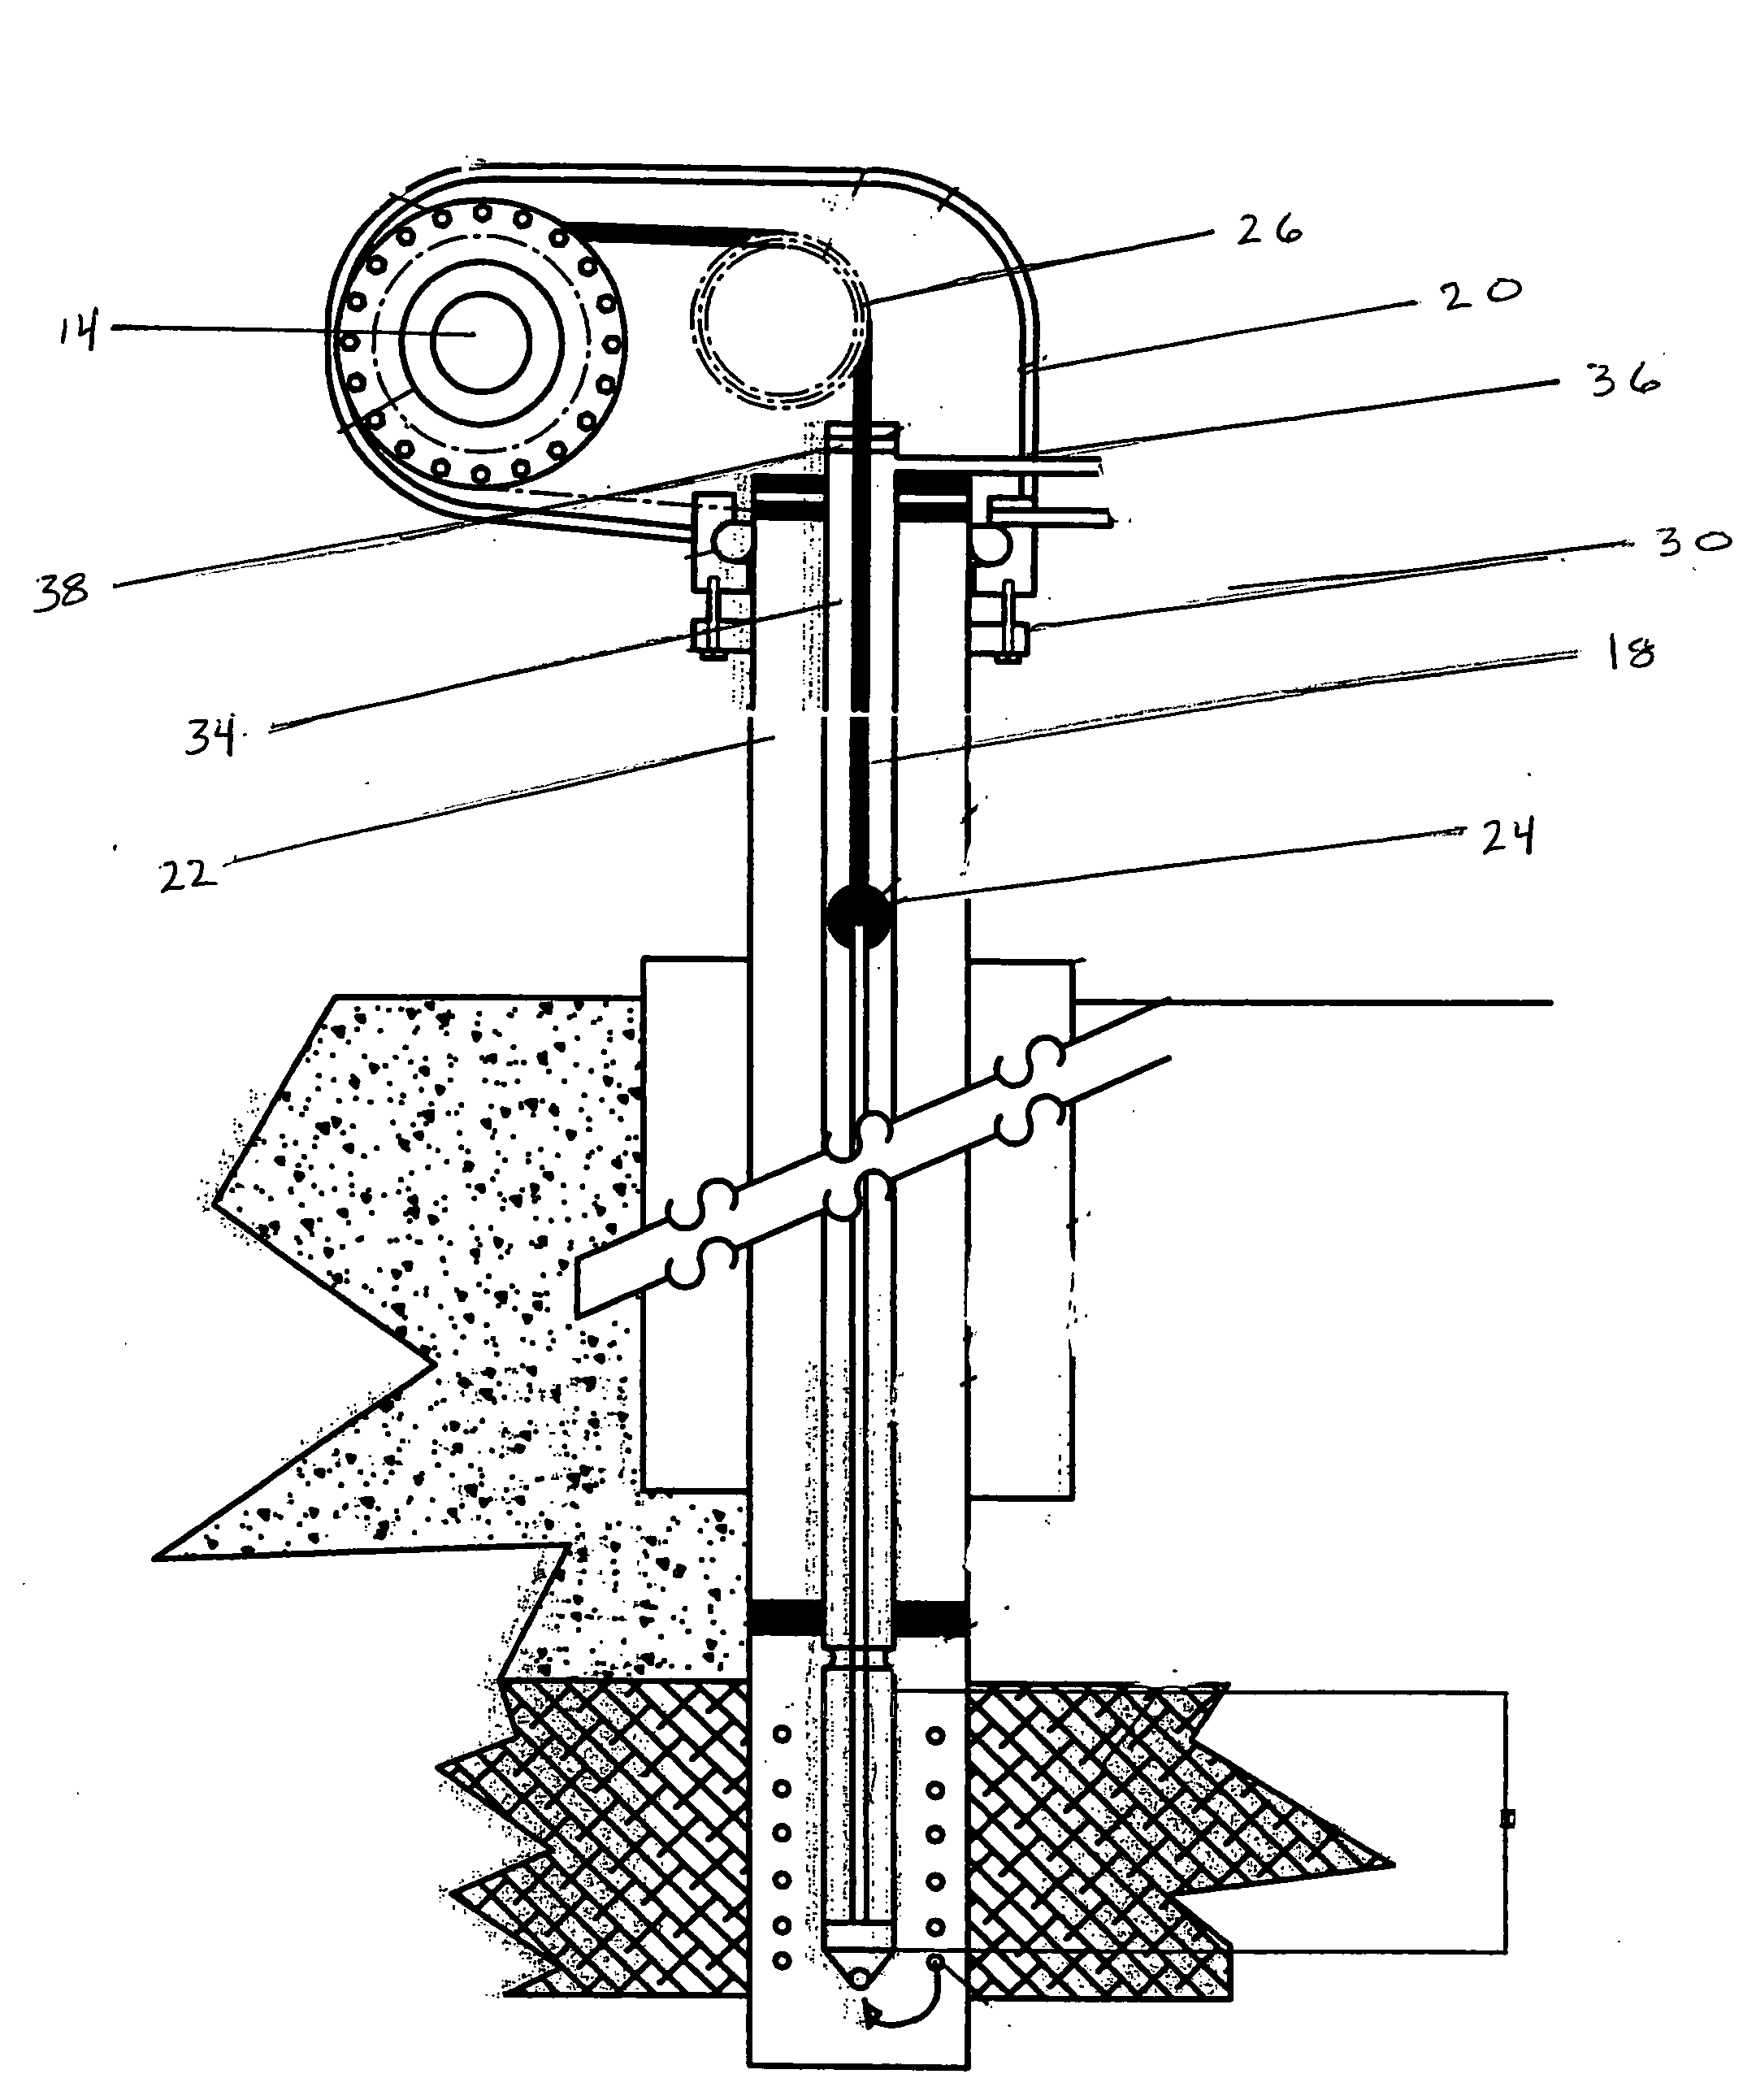 Variably operable oil recovery system